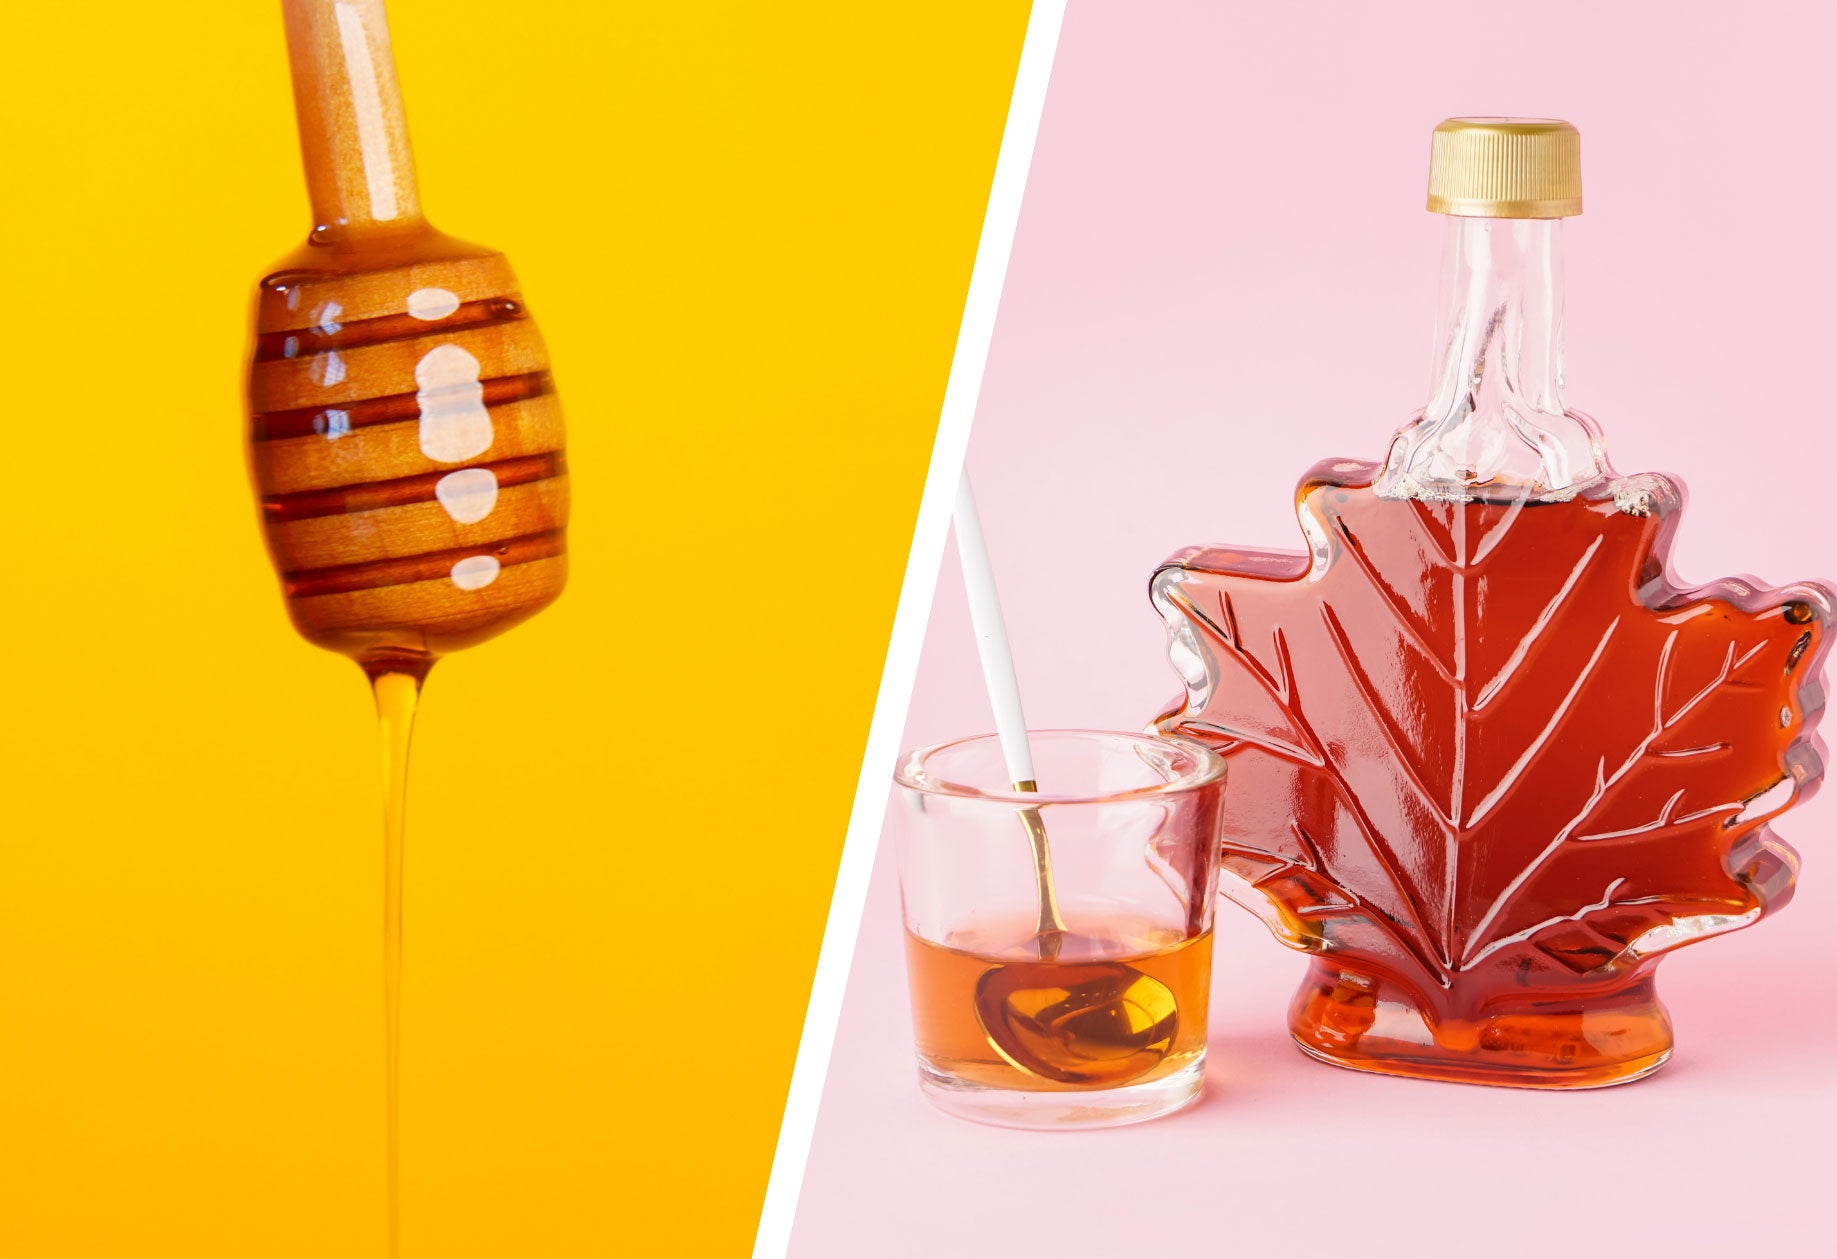 Honey vs Maple Syrup. What's the difference